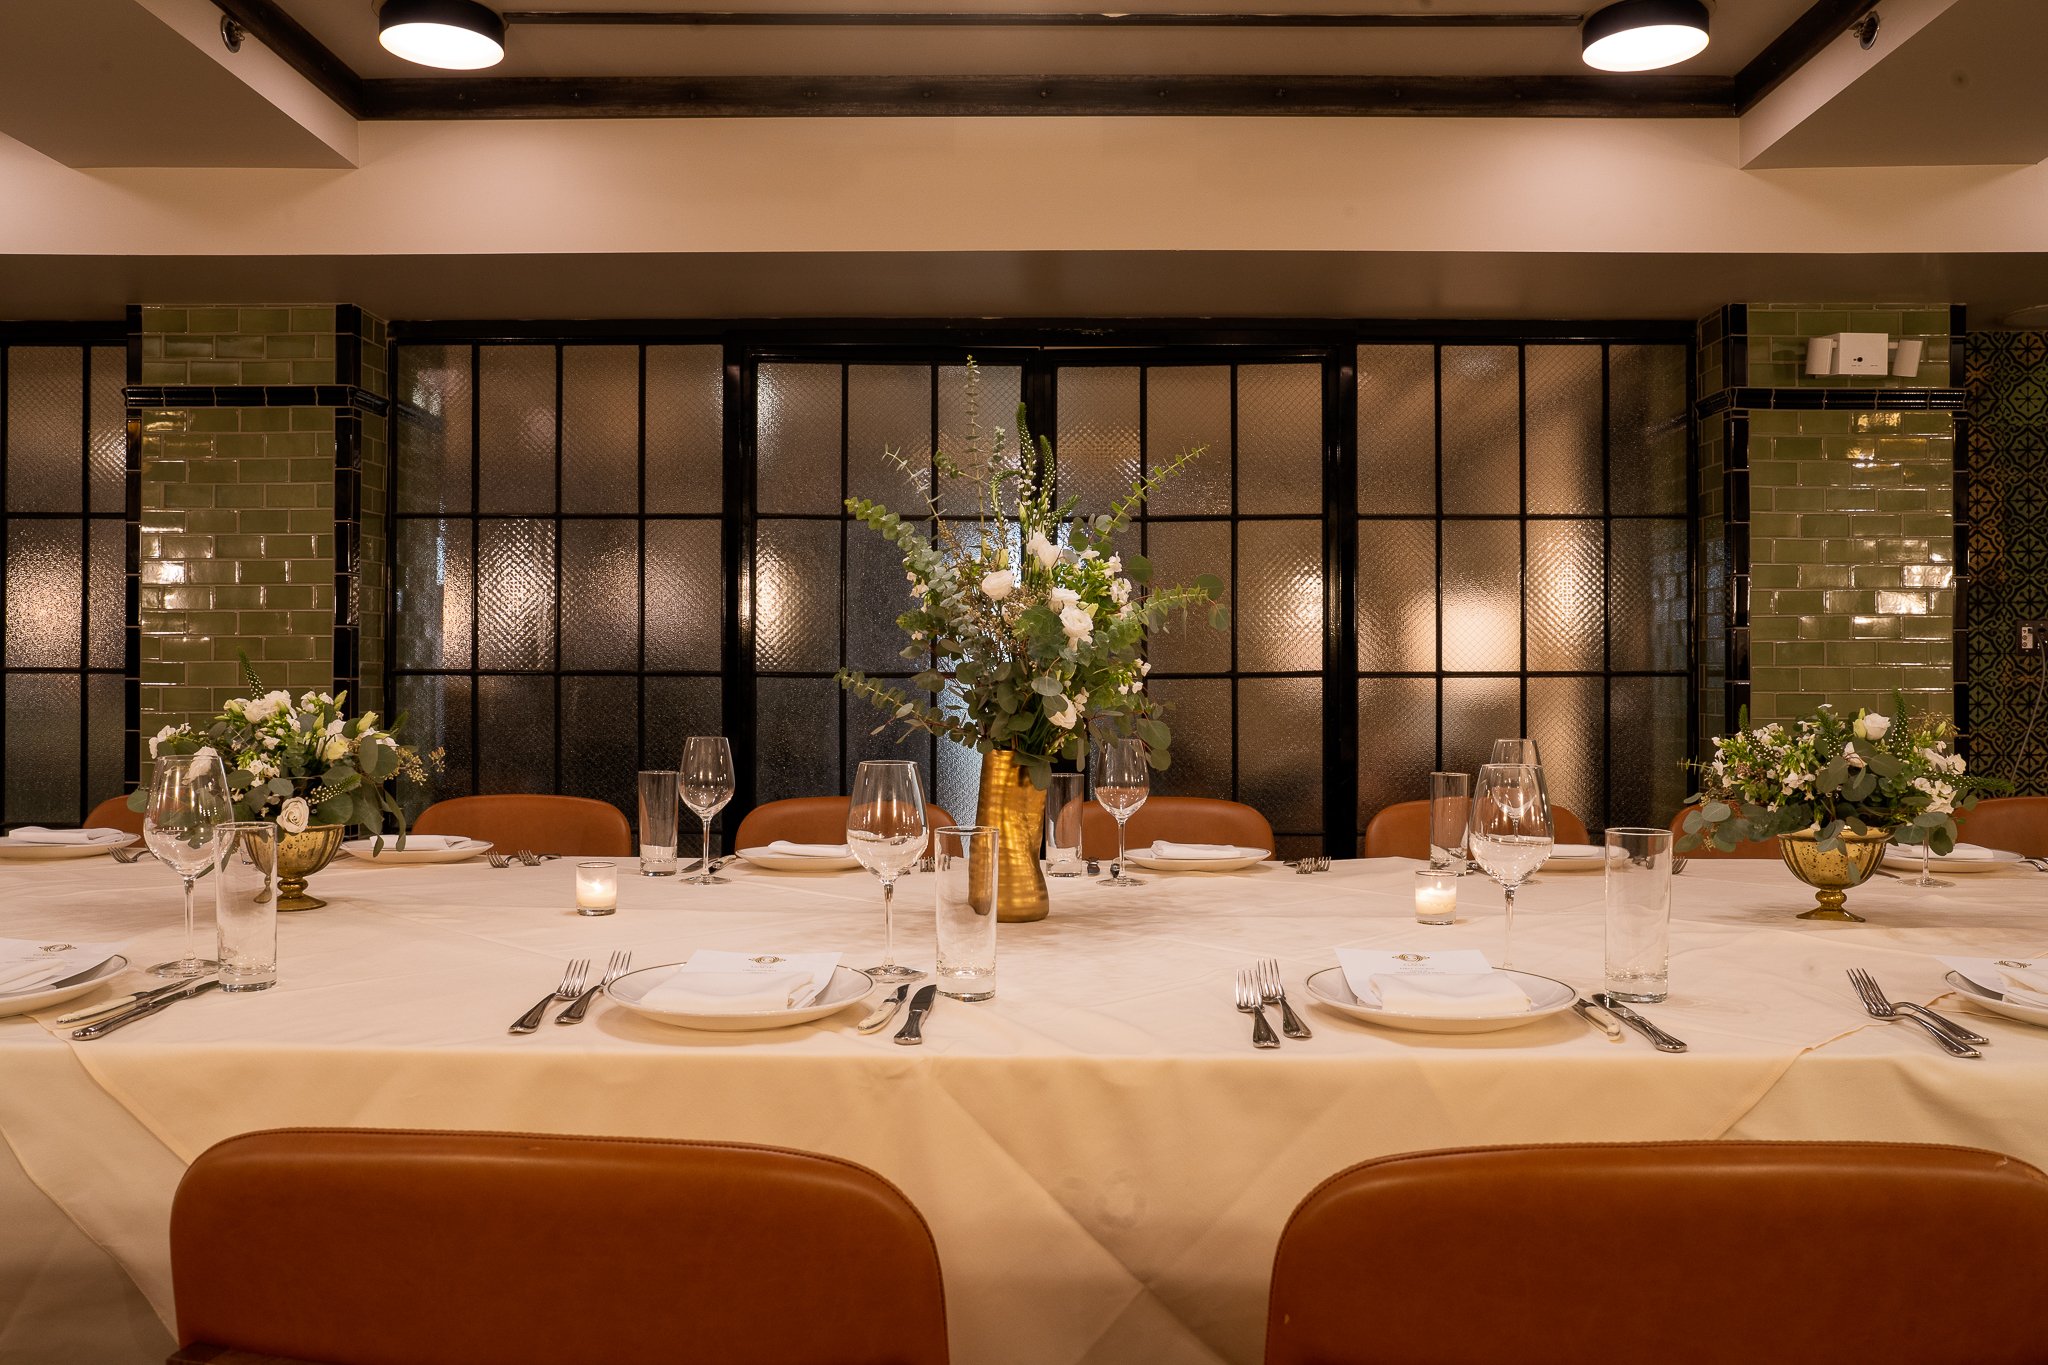 Long table set for intimate private dinner event